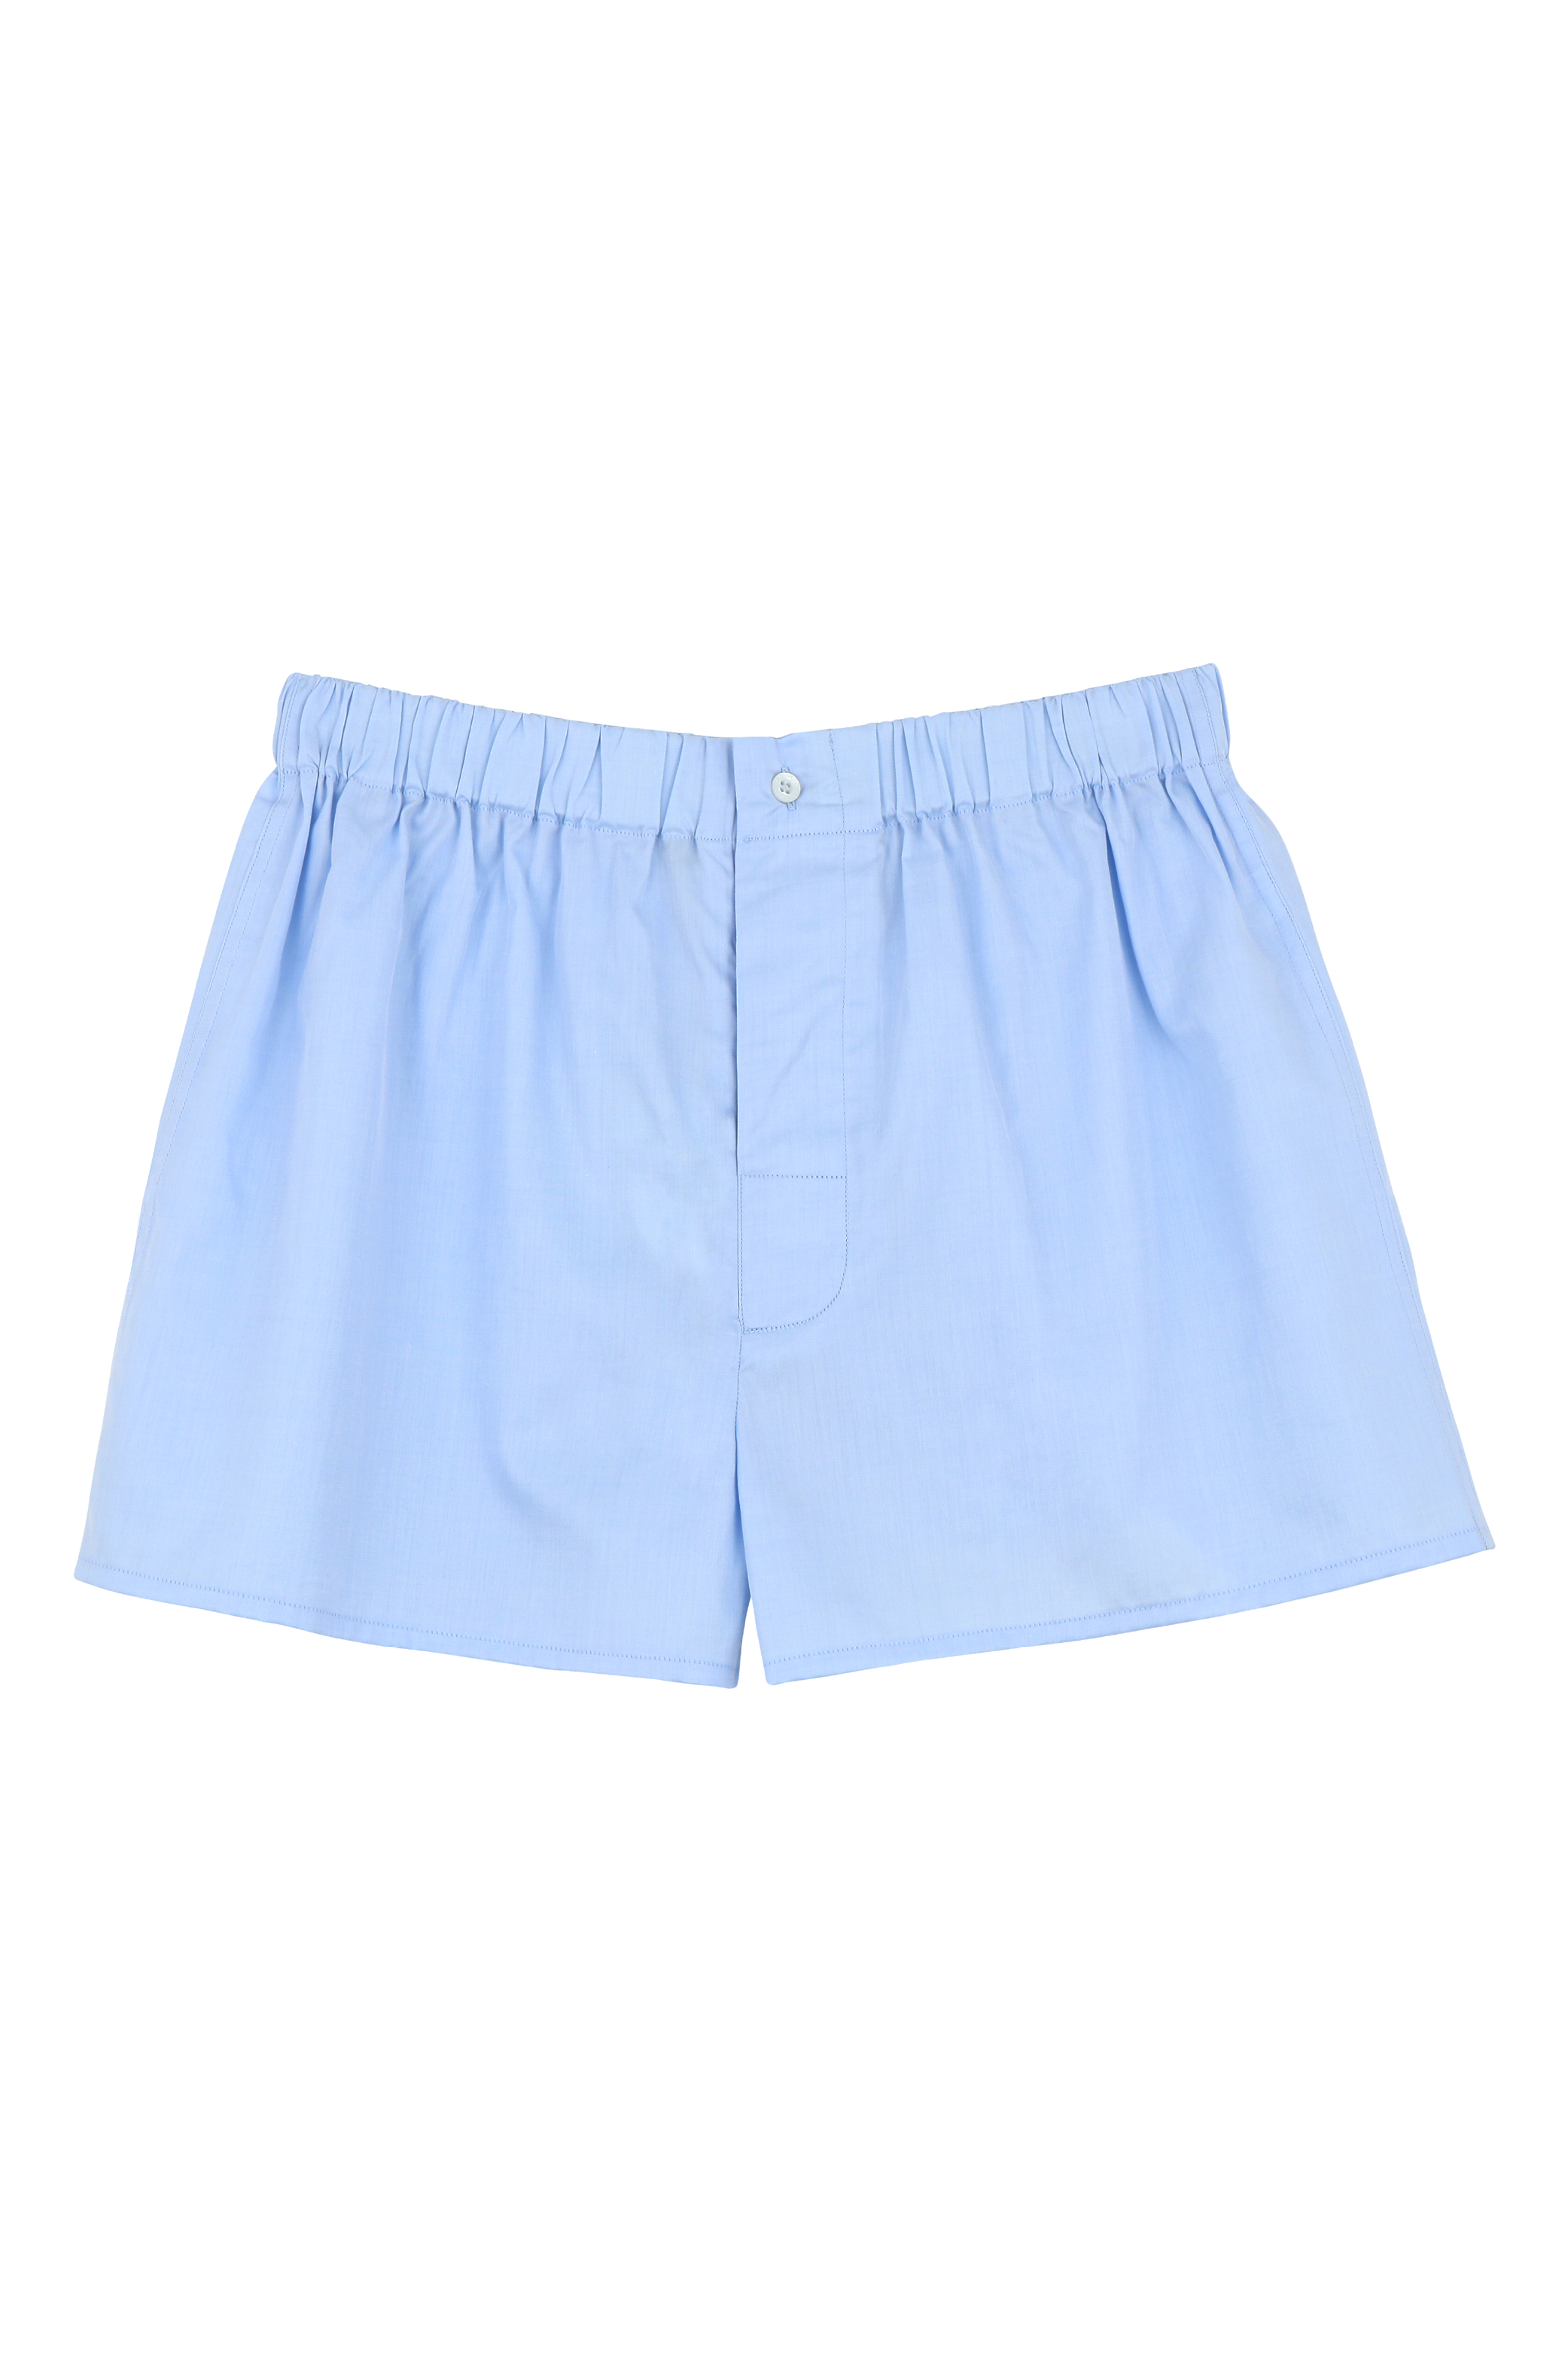 The Marcel in sky blue cotton broadcloth